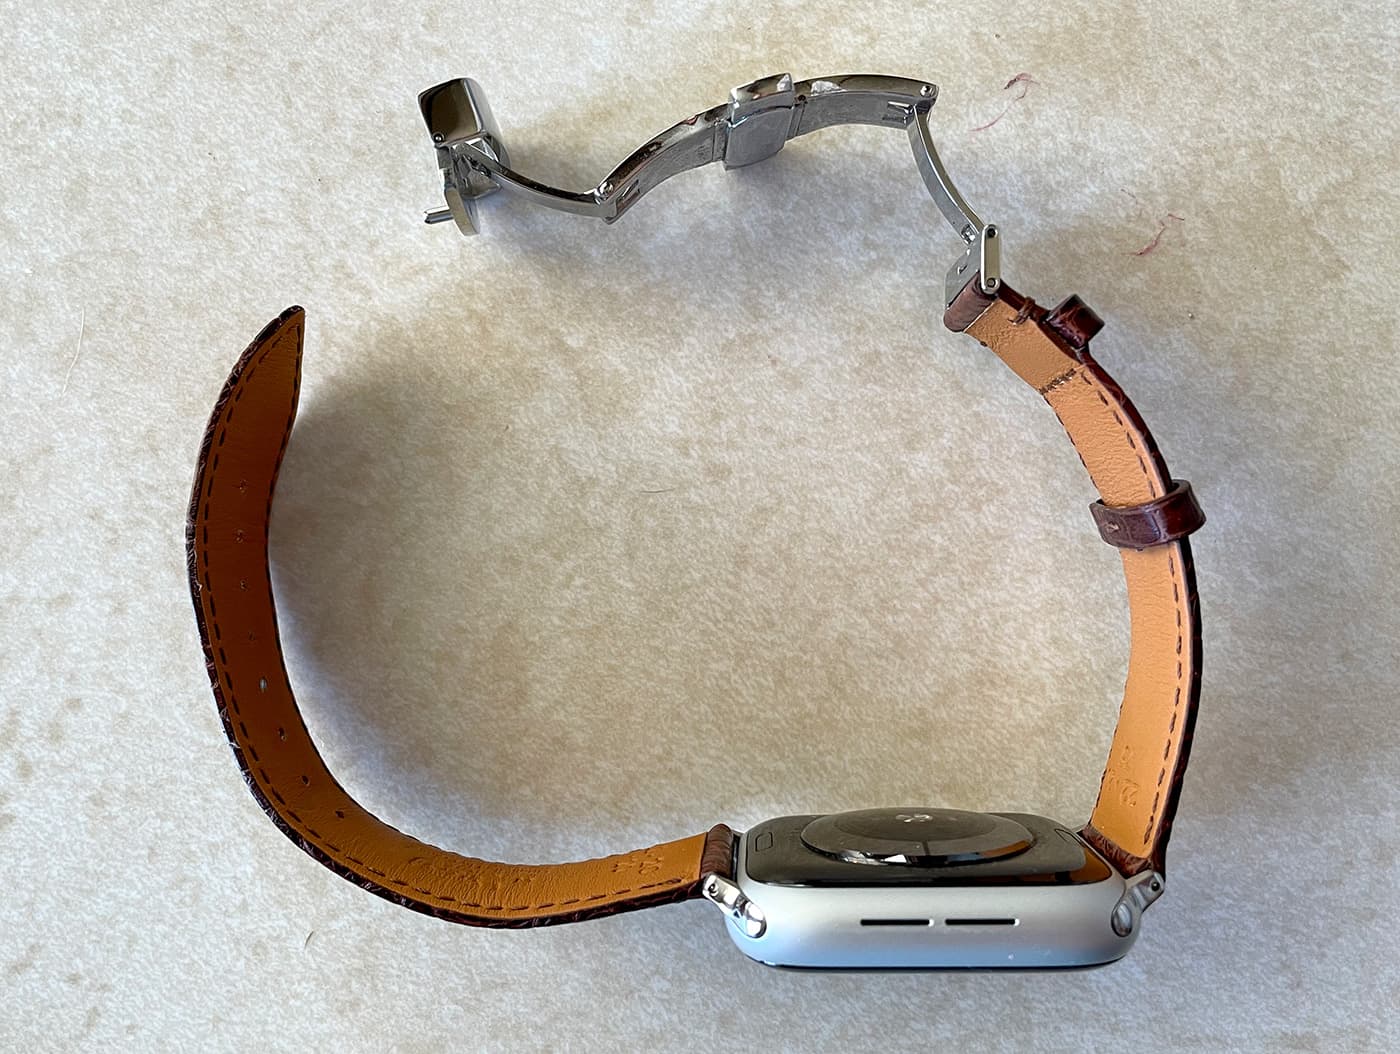 Best Designer Apple Watch Bands 2021 - Expert Review and Buying Guide -  Lululook Official